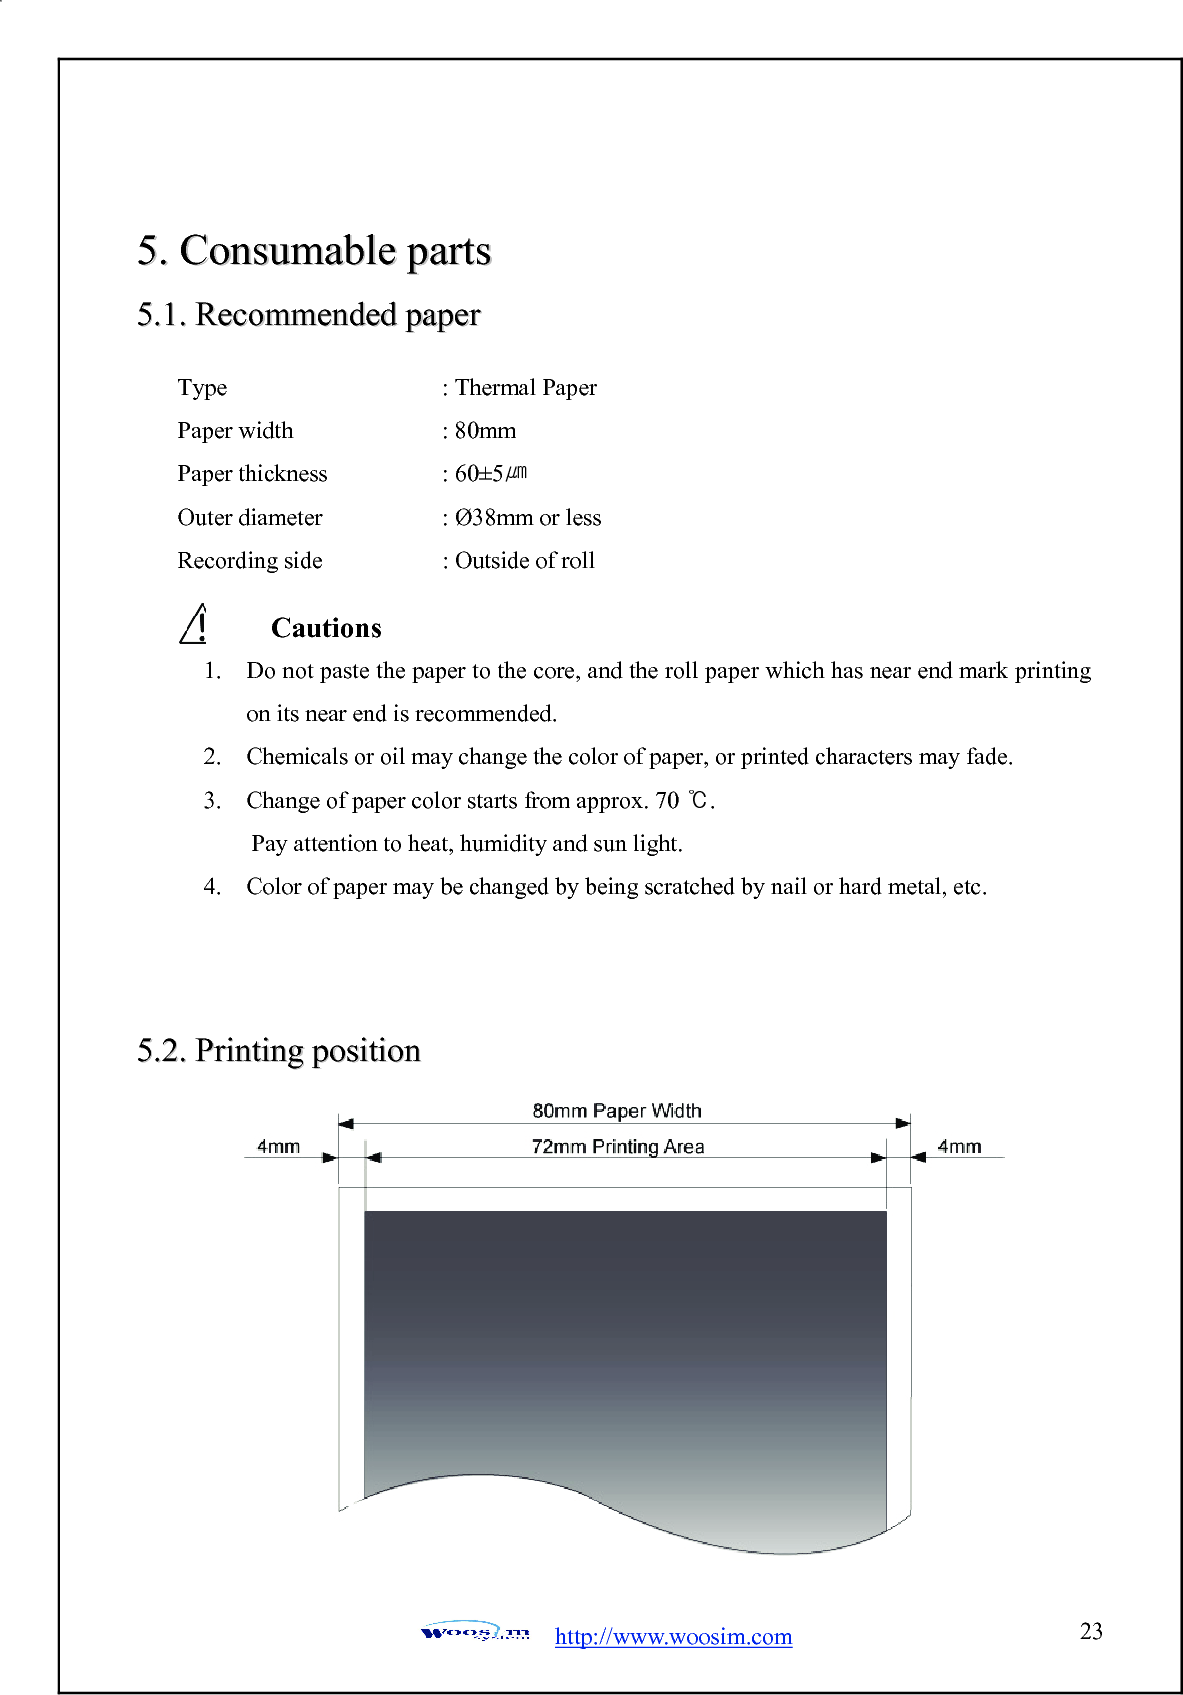  http://www.woosim.com 2355..  CCoonnssuummaabbllee  ppaarrttss  55..11..  RReeccoommmmeennddeedd  ppaappeerr                  55..22..  PPrriinnttiinngg  ppoossiittiioonn             Type     : Thermal Paper Paper width    : 80mm Paper thickness     : 60±5㎛ Outer diameter      : Ø38mm or less Recording side    : Outside of roll   Cautions  1. Do not paste the paper to the core, and the roll paper which has near end mark printing on its near end is recommended. 2. Chemicals or oil may change the color of paper, or printed characters may fade. 3. Change of paper color starts from approx. 70 ℃.          Pay attention to heat, humidity and sun light. 4. Color of paper may be changed by being scratched by nail or hard metal, etc. 